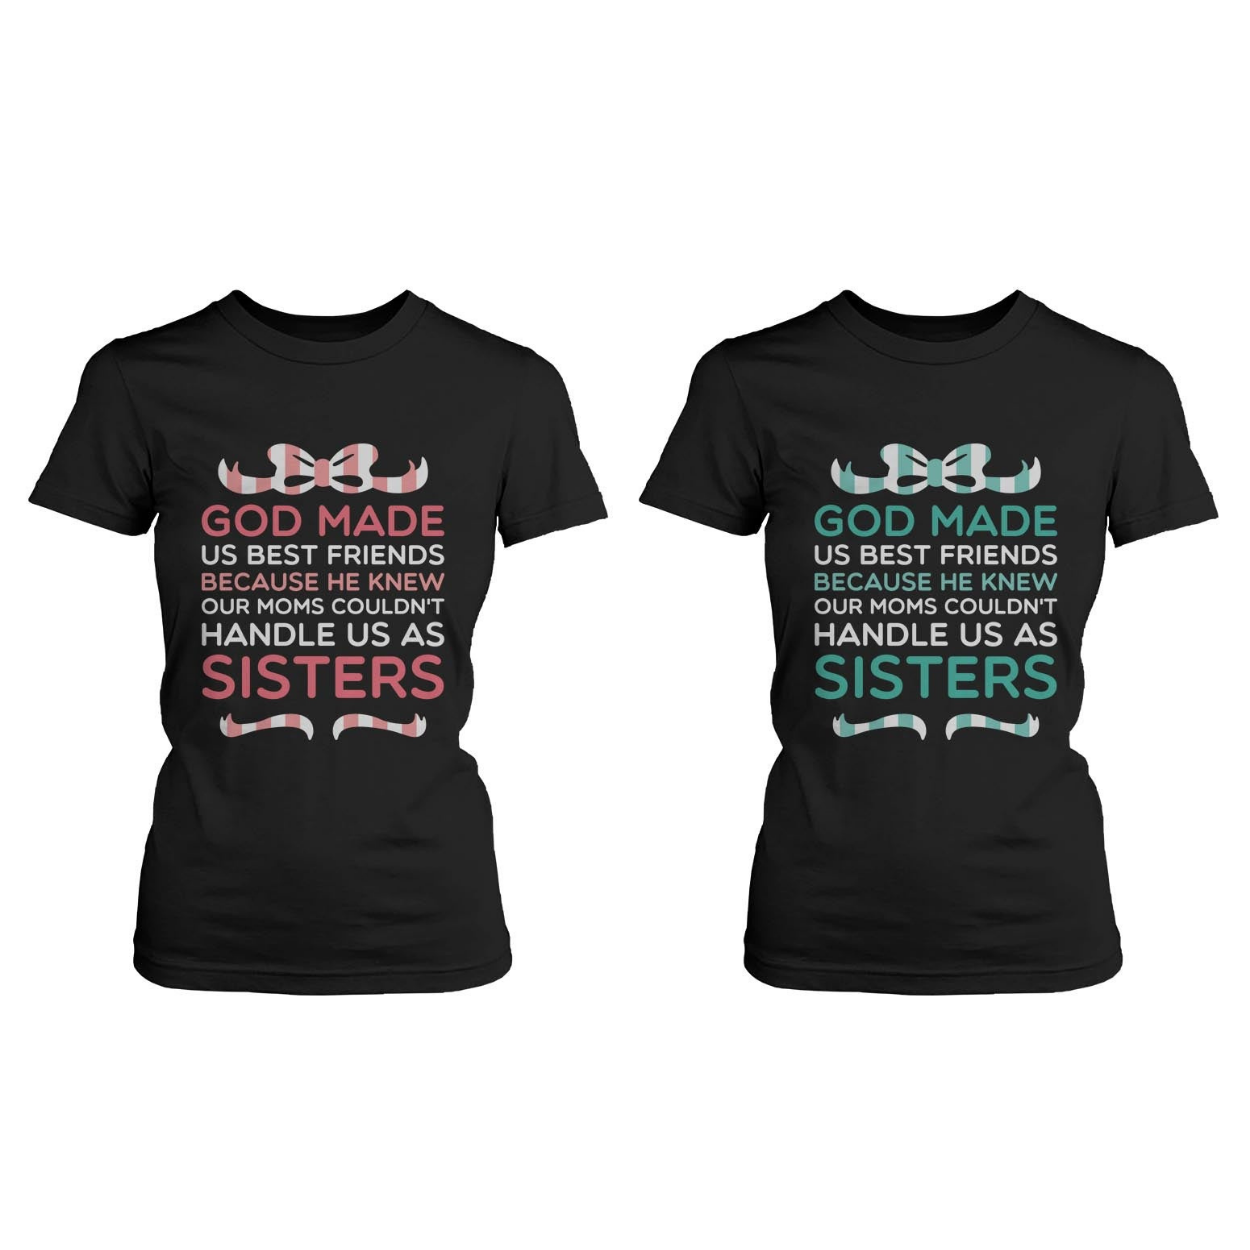 Best Friend Quote Tee- God Made Us Best Friends - Cute Matching Bff Shirts - 365 In Love